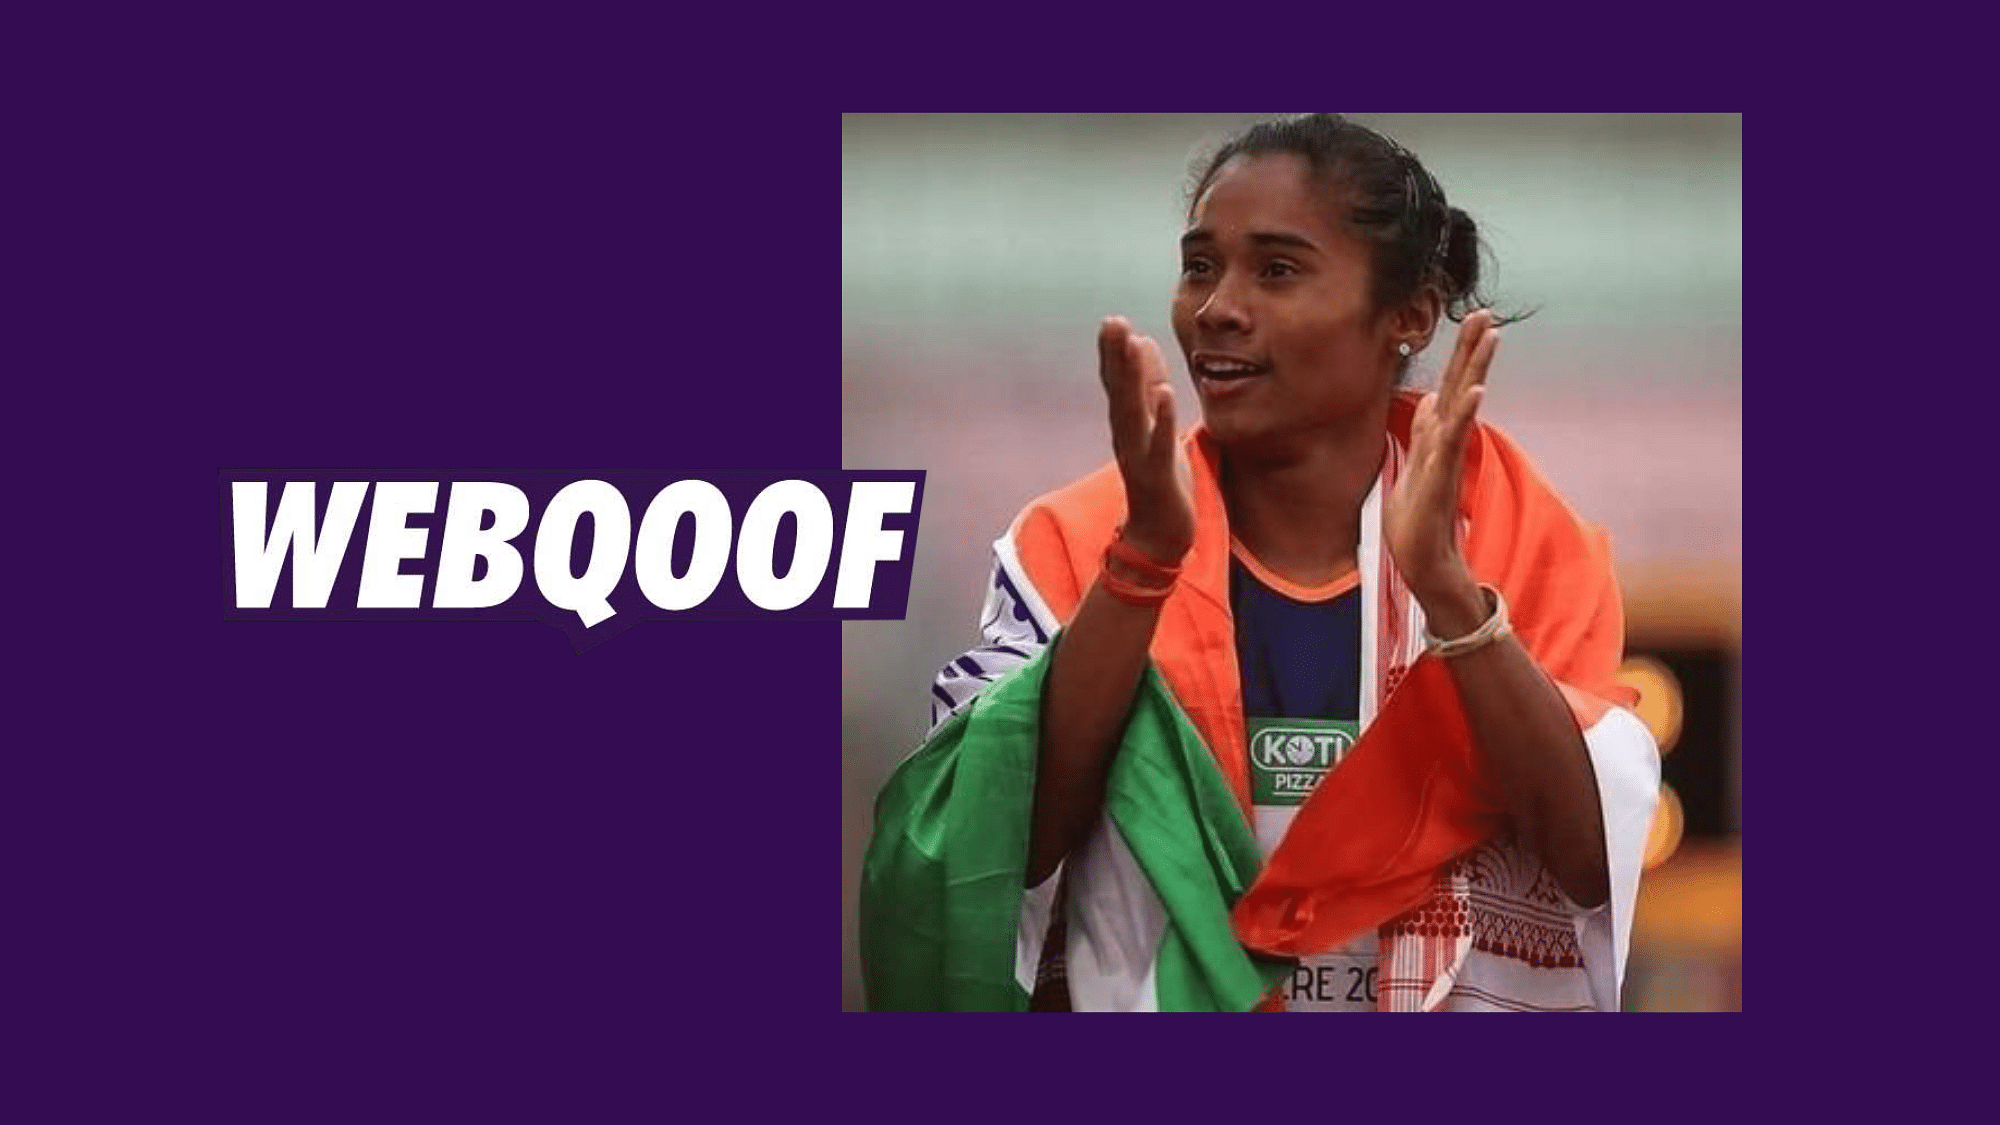 A viral video falsely claimed that it shows Indian runner Hima Das’ family.